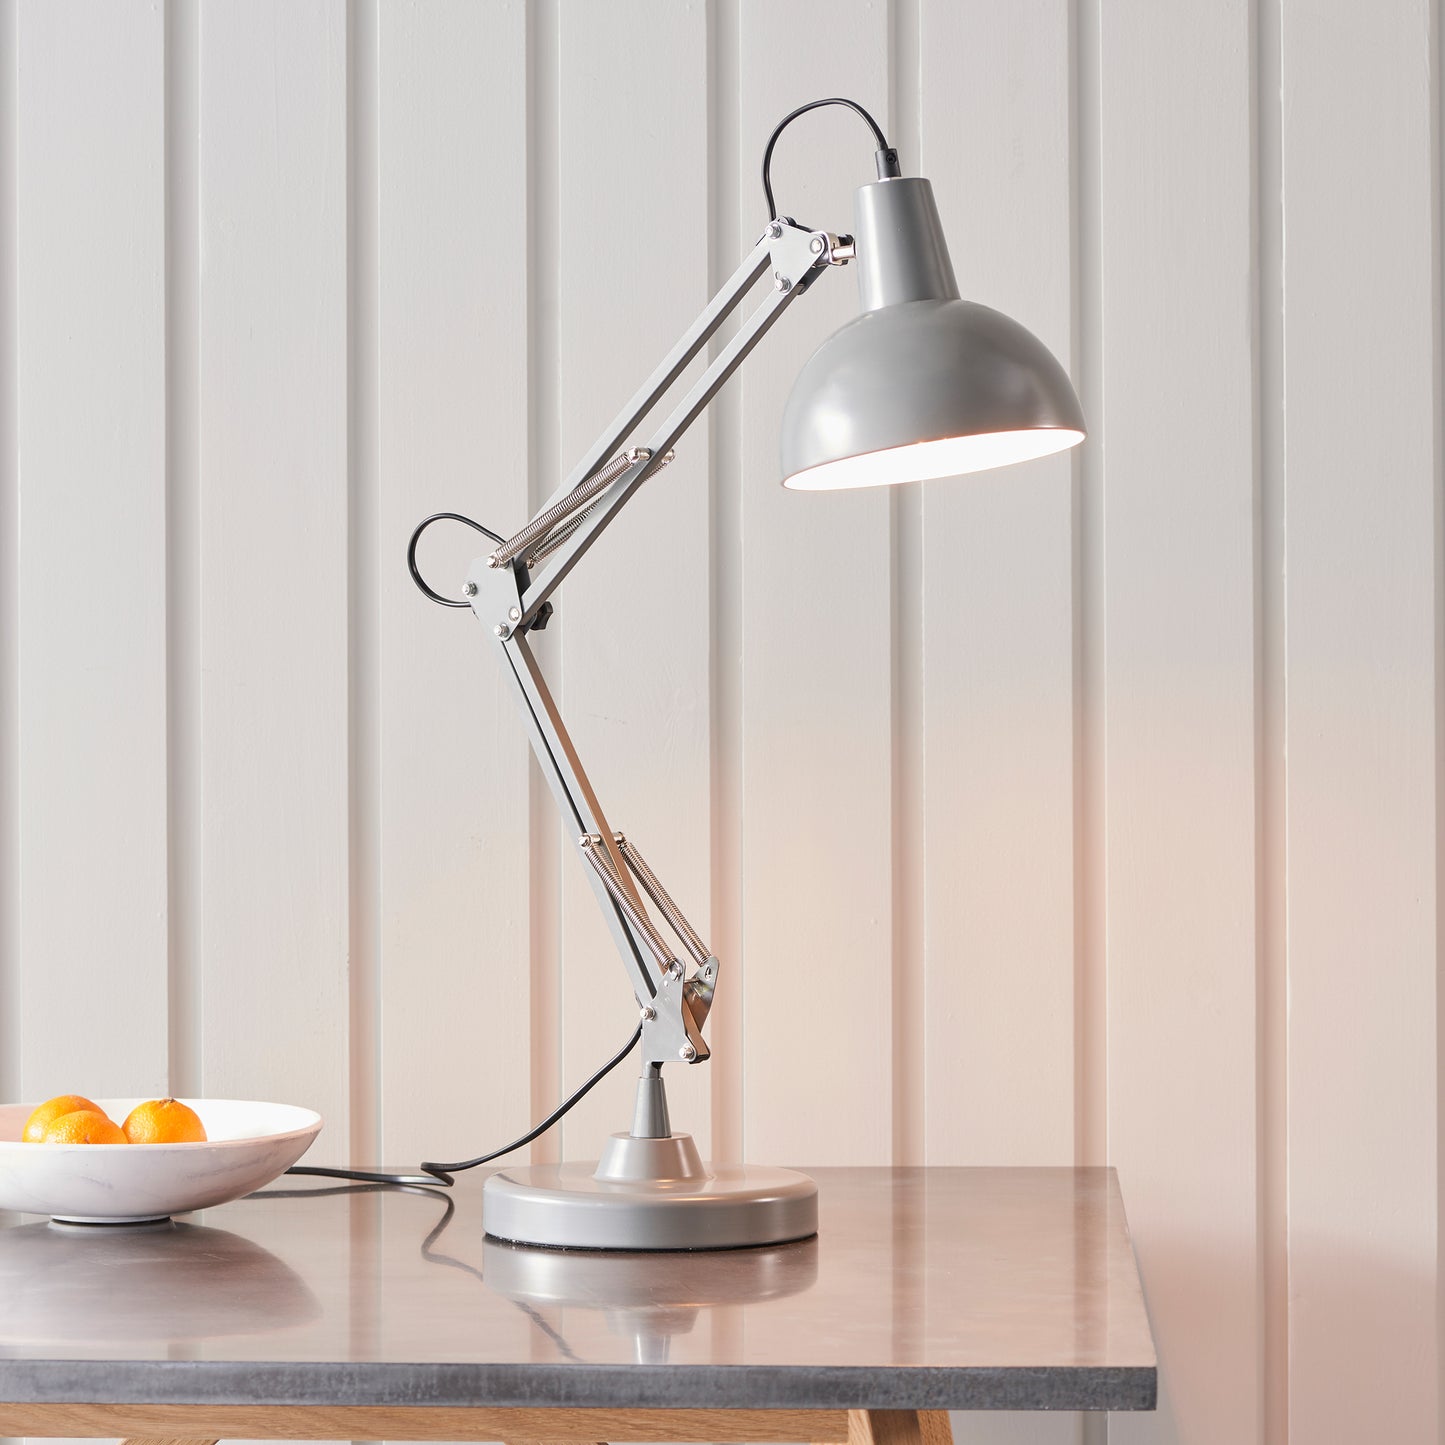 A Marshall 1 Table Light Slate Grey & White from Kikiathome.co.uk is on a table next to a bowl of oranges, showcasing interior decor.